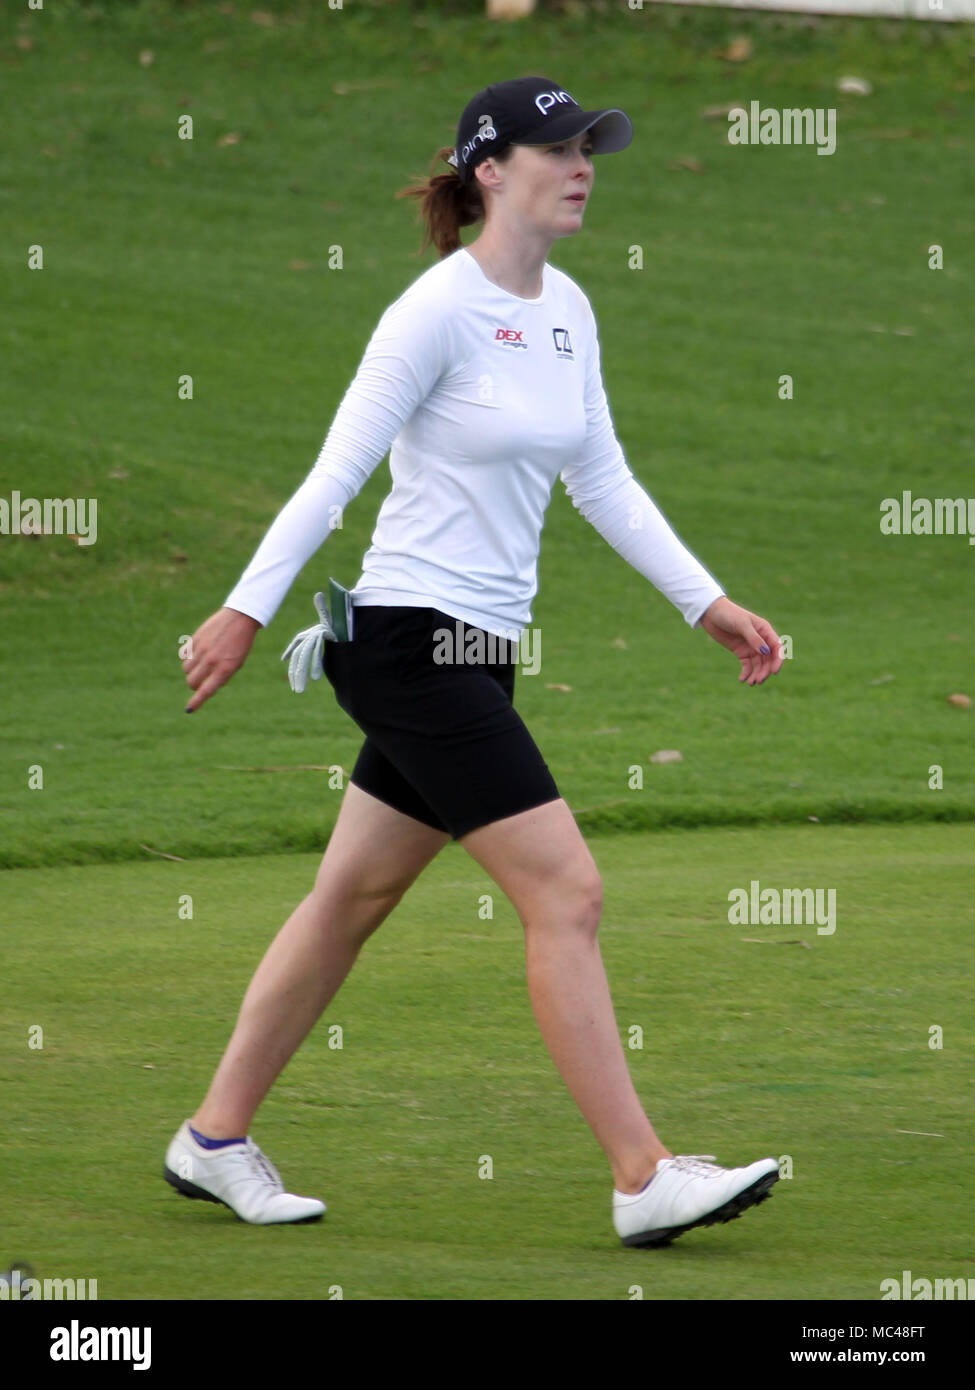 April 12, 2018 - Brittany Altomare walks the 3rd fairway during the second round of the LPGA LOTTE Championship at the Ko Olina Golf Club in Kapolei, HI - Michael Sullivan/CSM Stock Photo